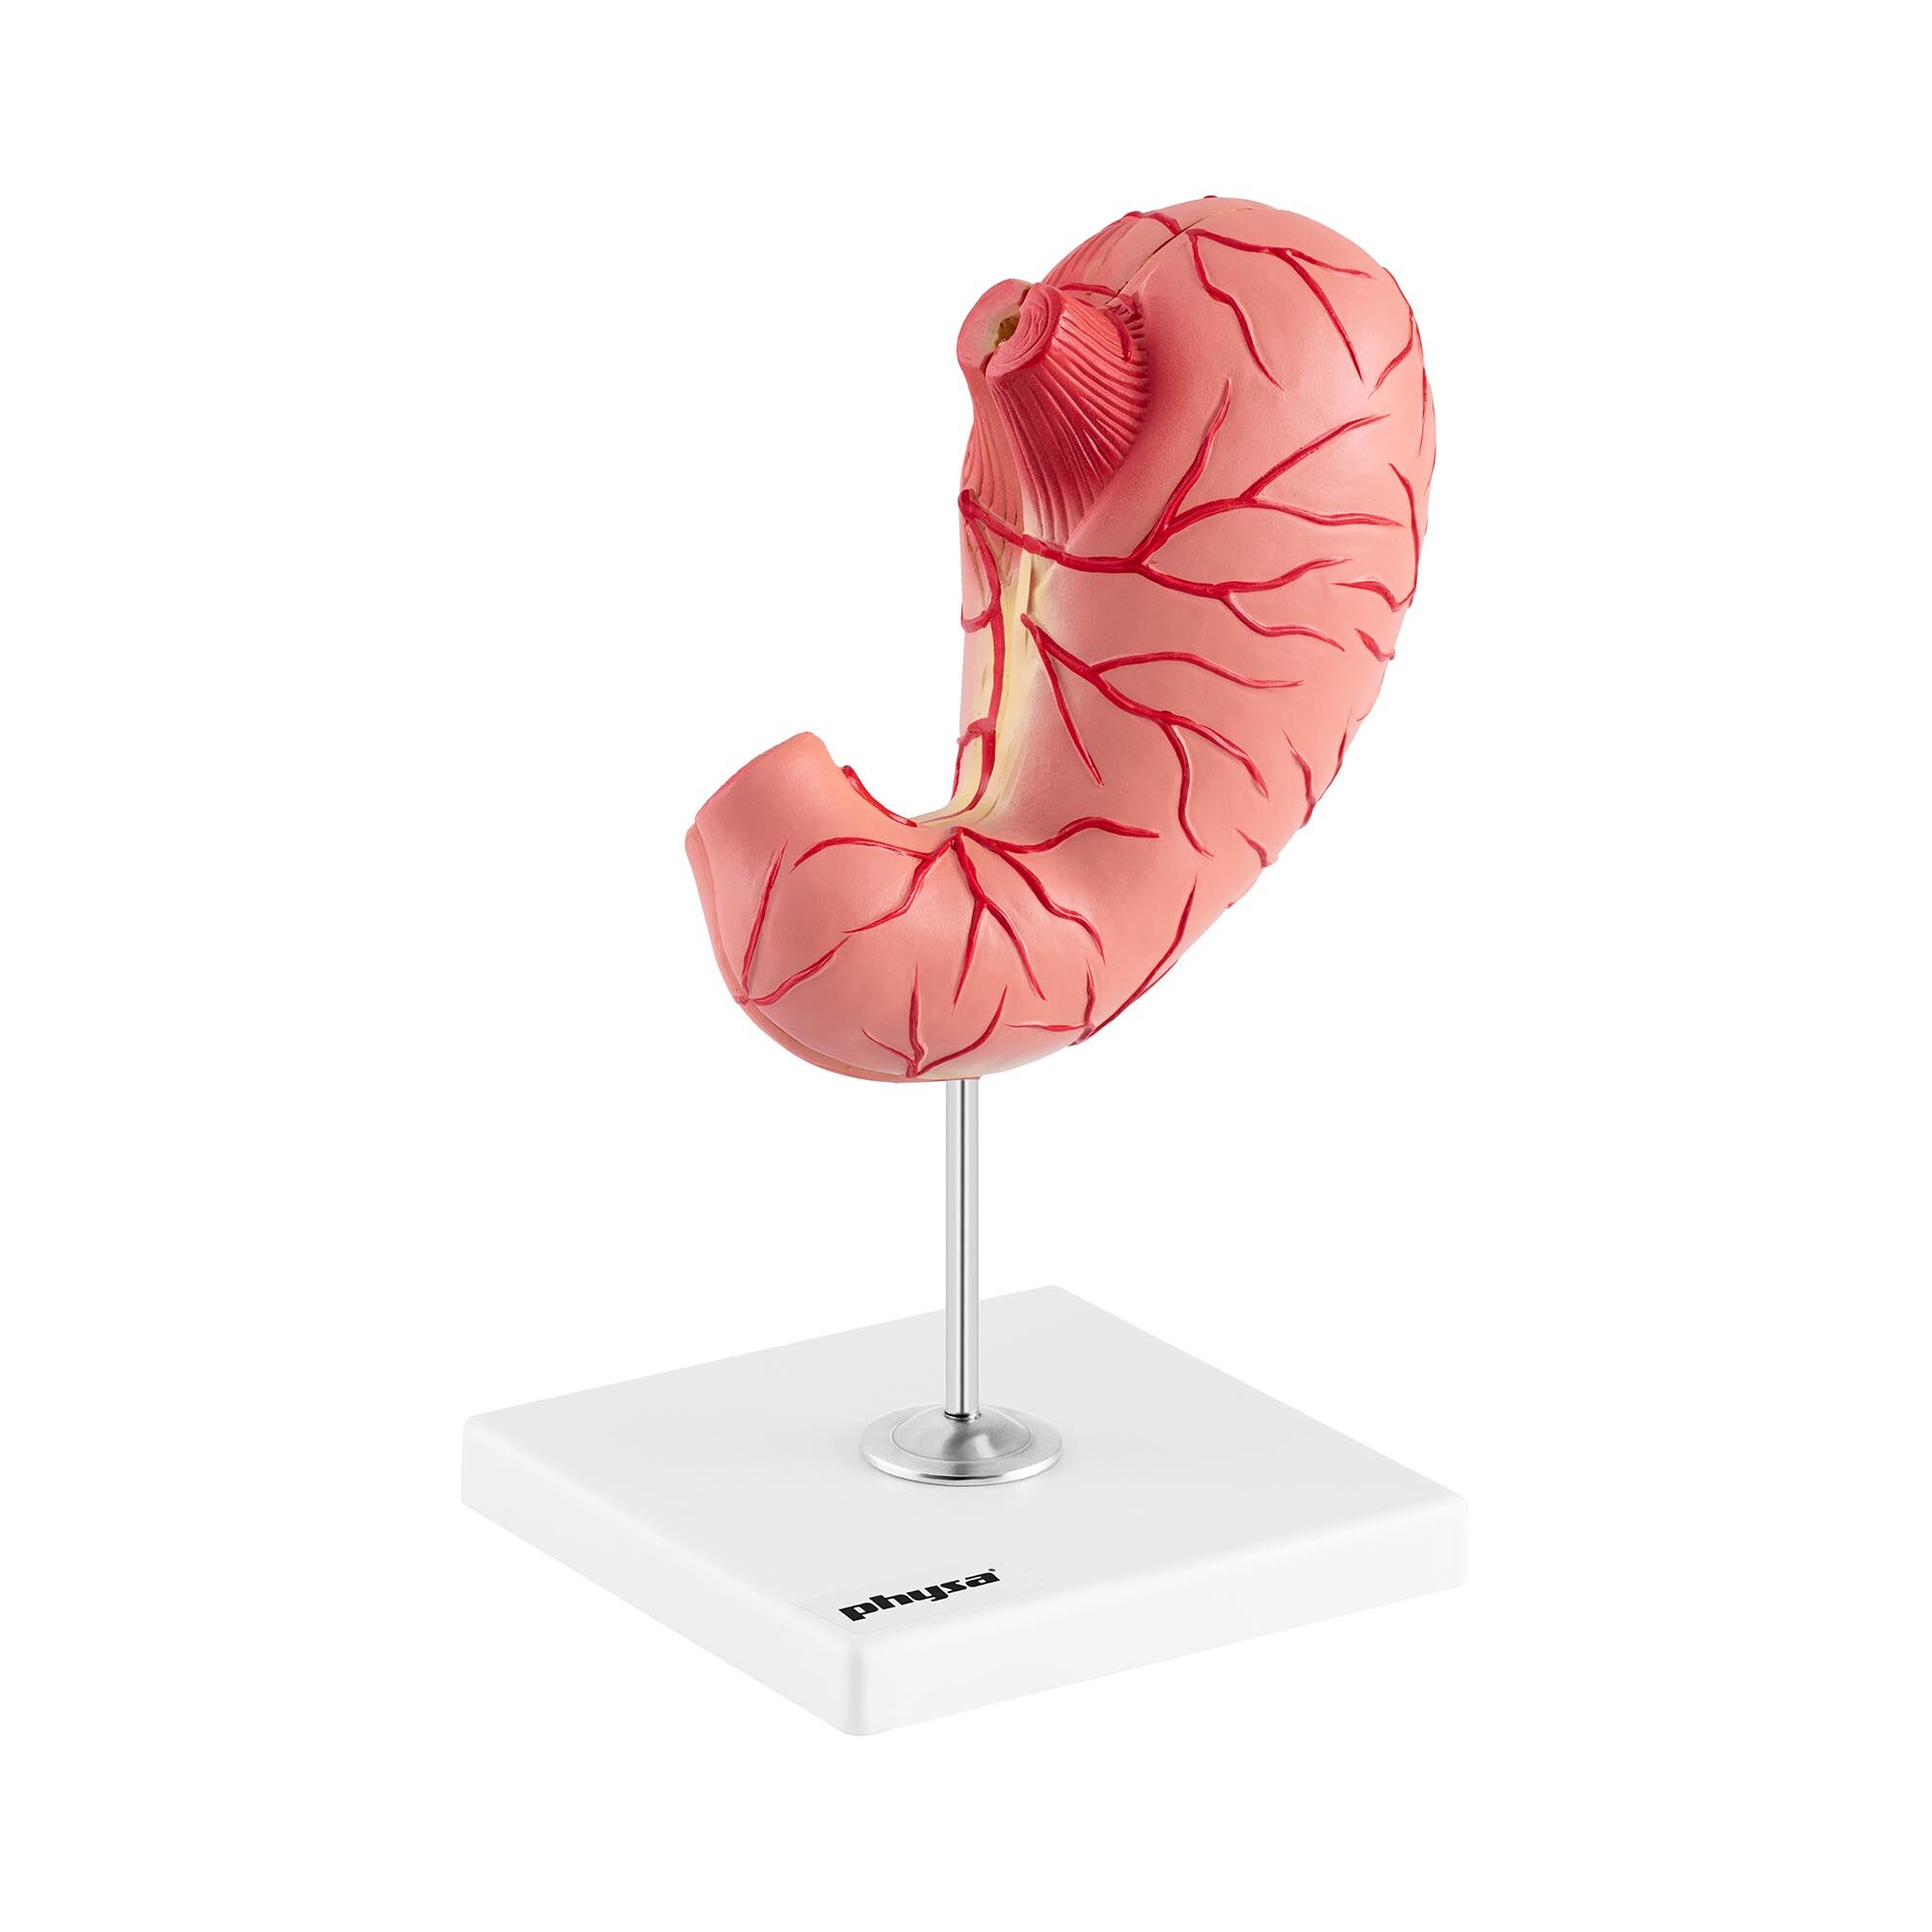 physa Stomach Model - separable into 2 pieces - life-sized